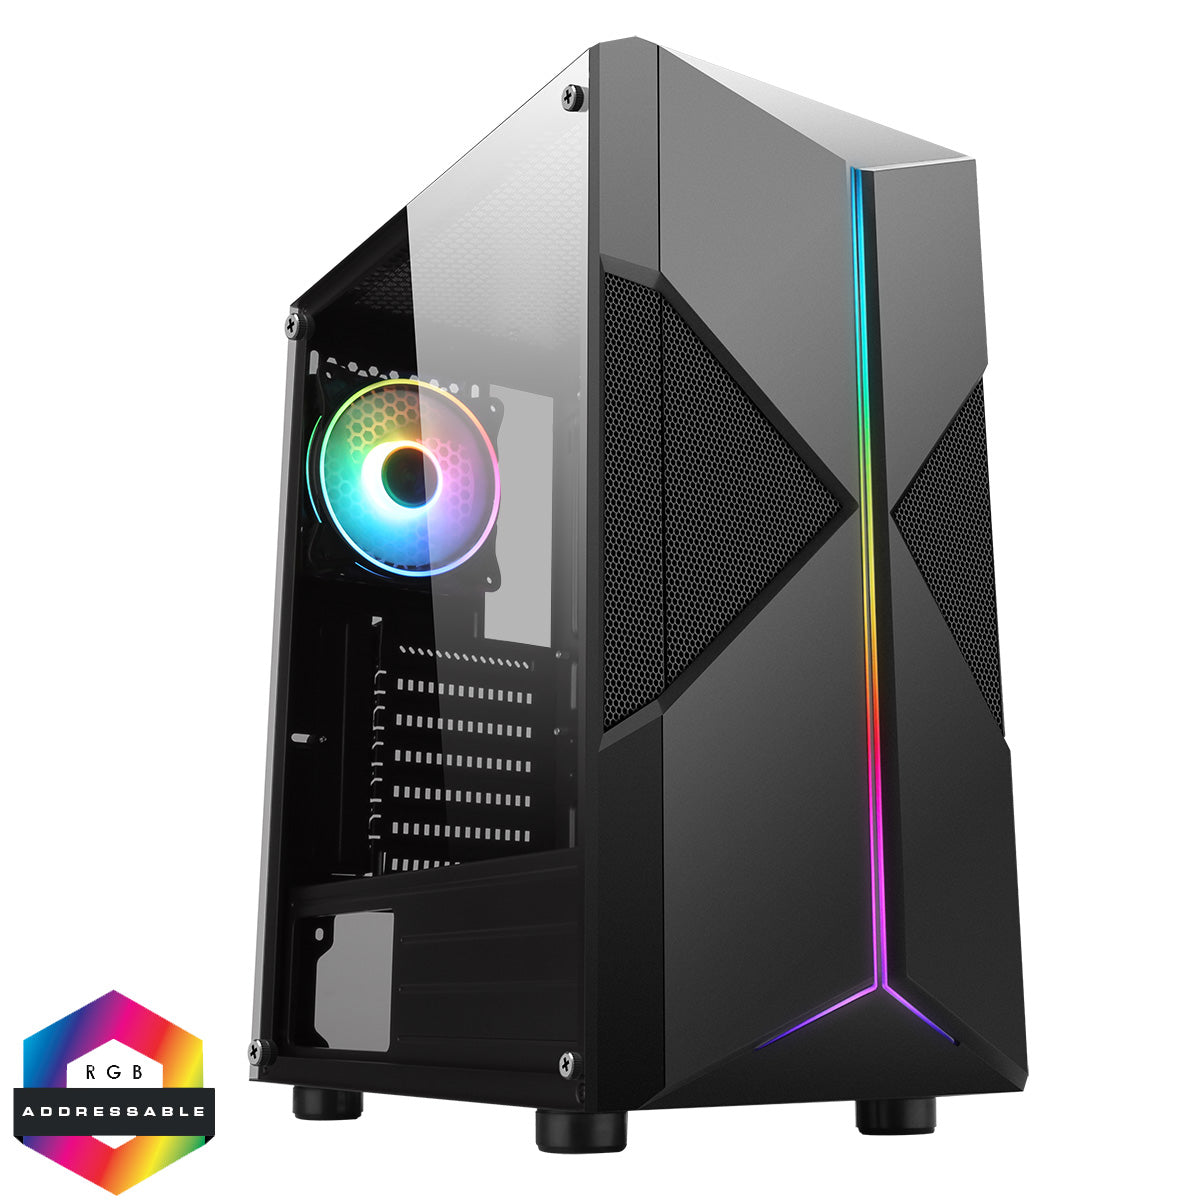 CiT Pyro Gaming Windowed Mid Tower ARGB LED Gaming PC Case with Tempered Glass Window